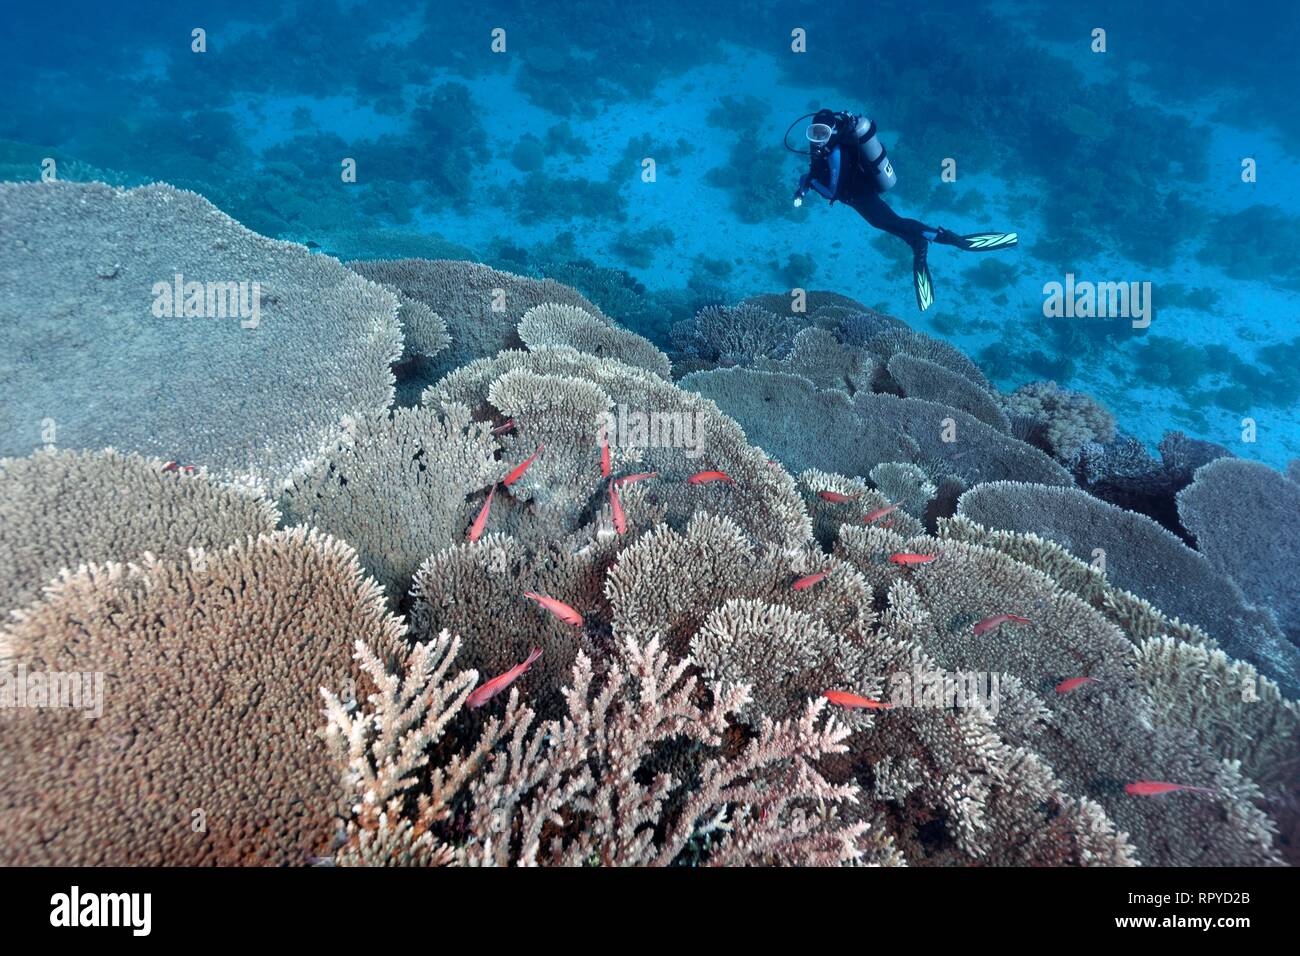 Diver looking at Coral Reef with Steinkoralle sp. (Acropora robusta) and Pinecone soldierfishes (Myripristis murdjan), Red Sea Stock Photo